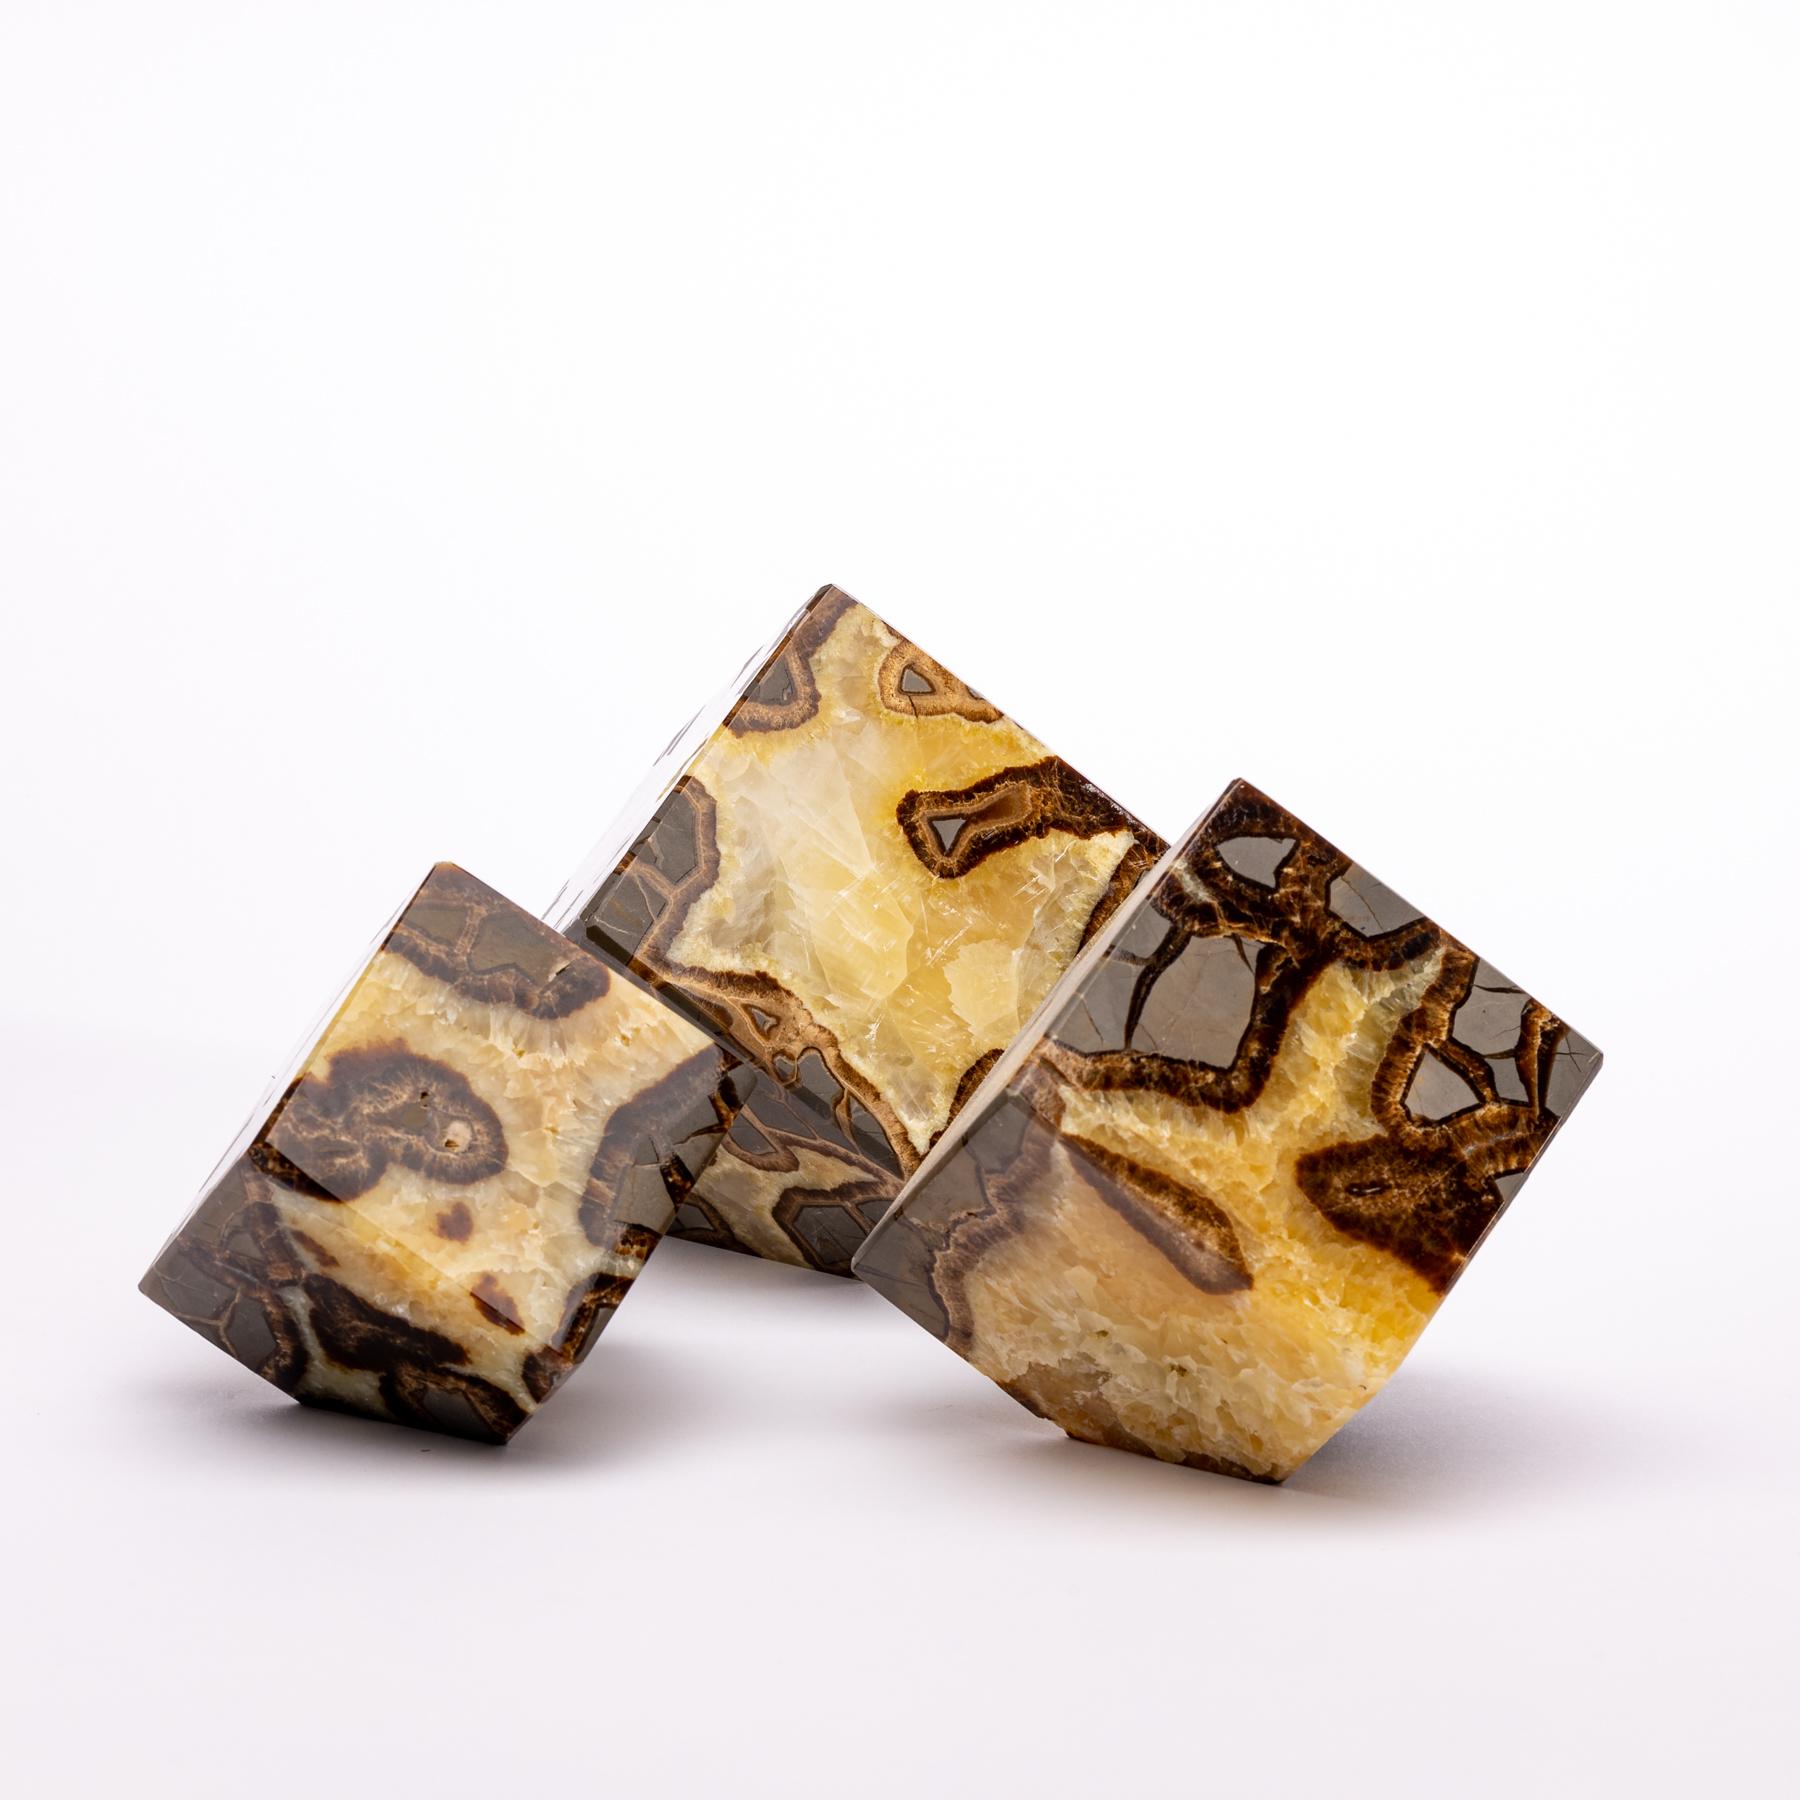 Very decorative set of three septarian cubes from Madagascar
Sizes:
3